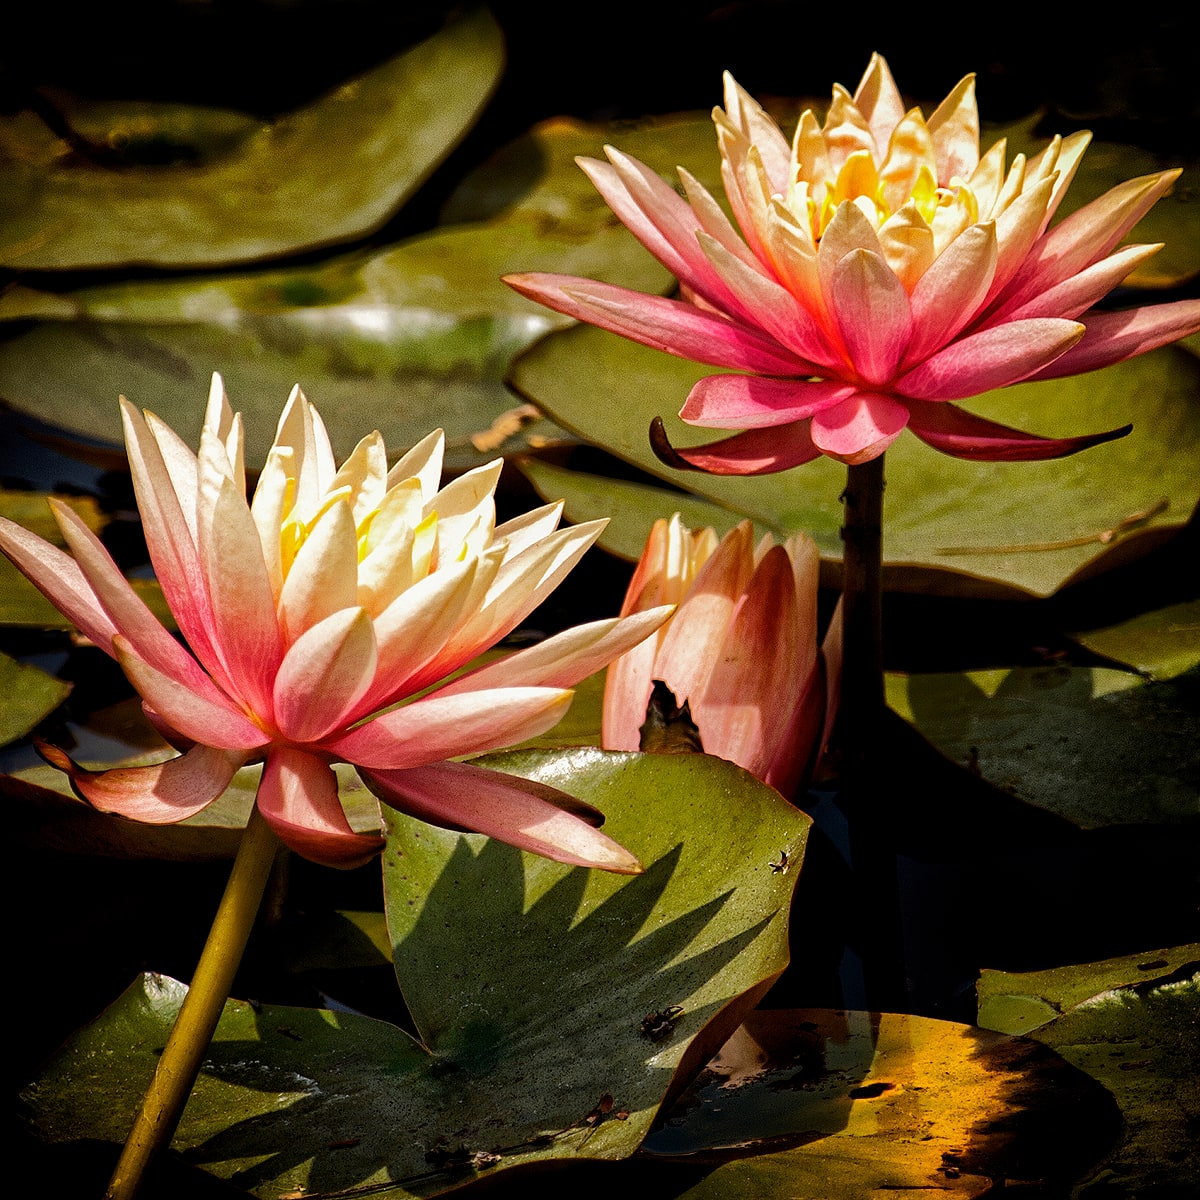 Water Lilly's - 2 by Mark Peacock  Image: Photograph